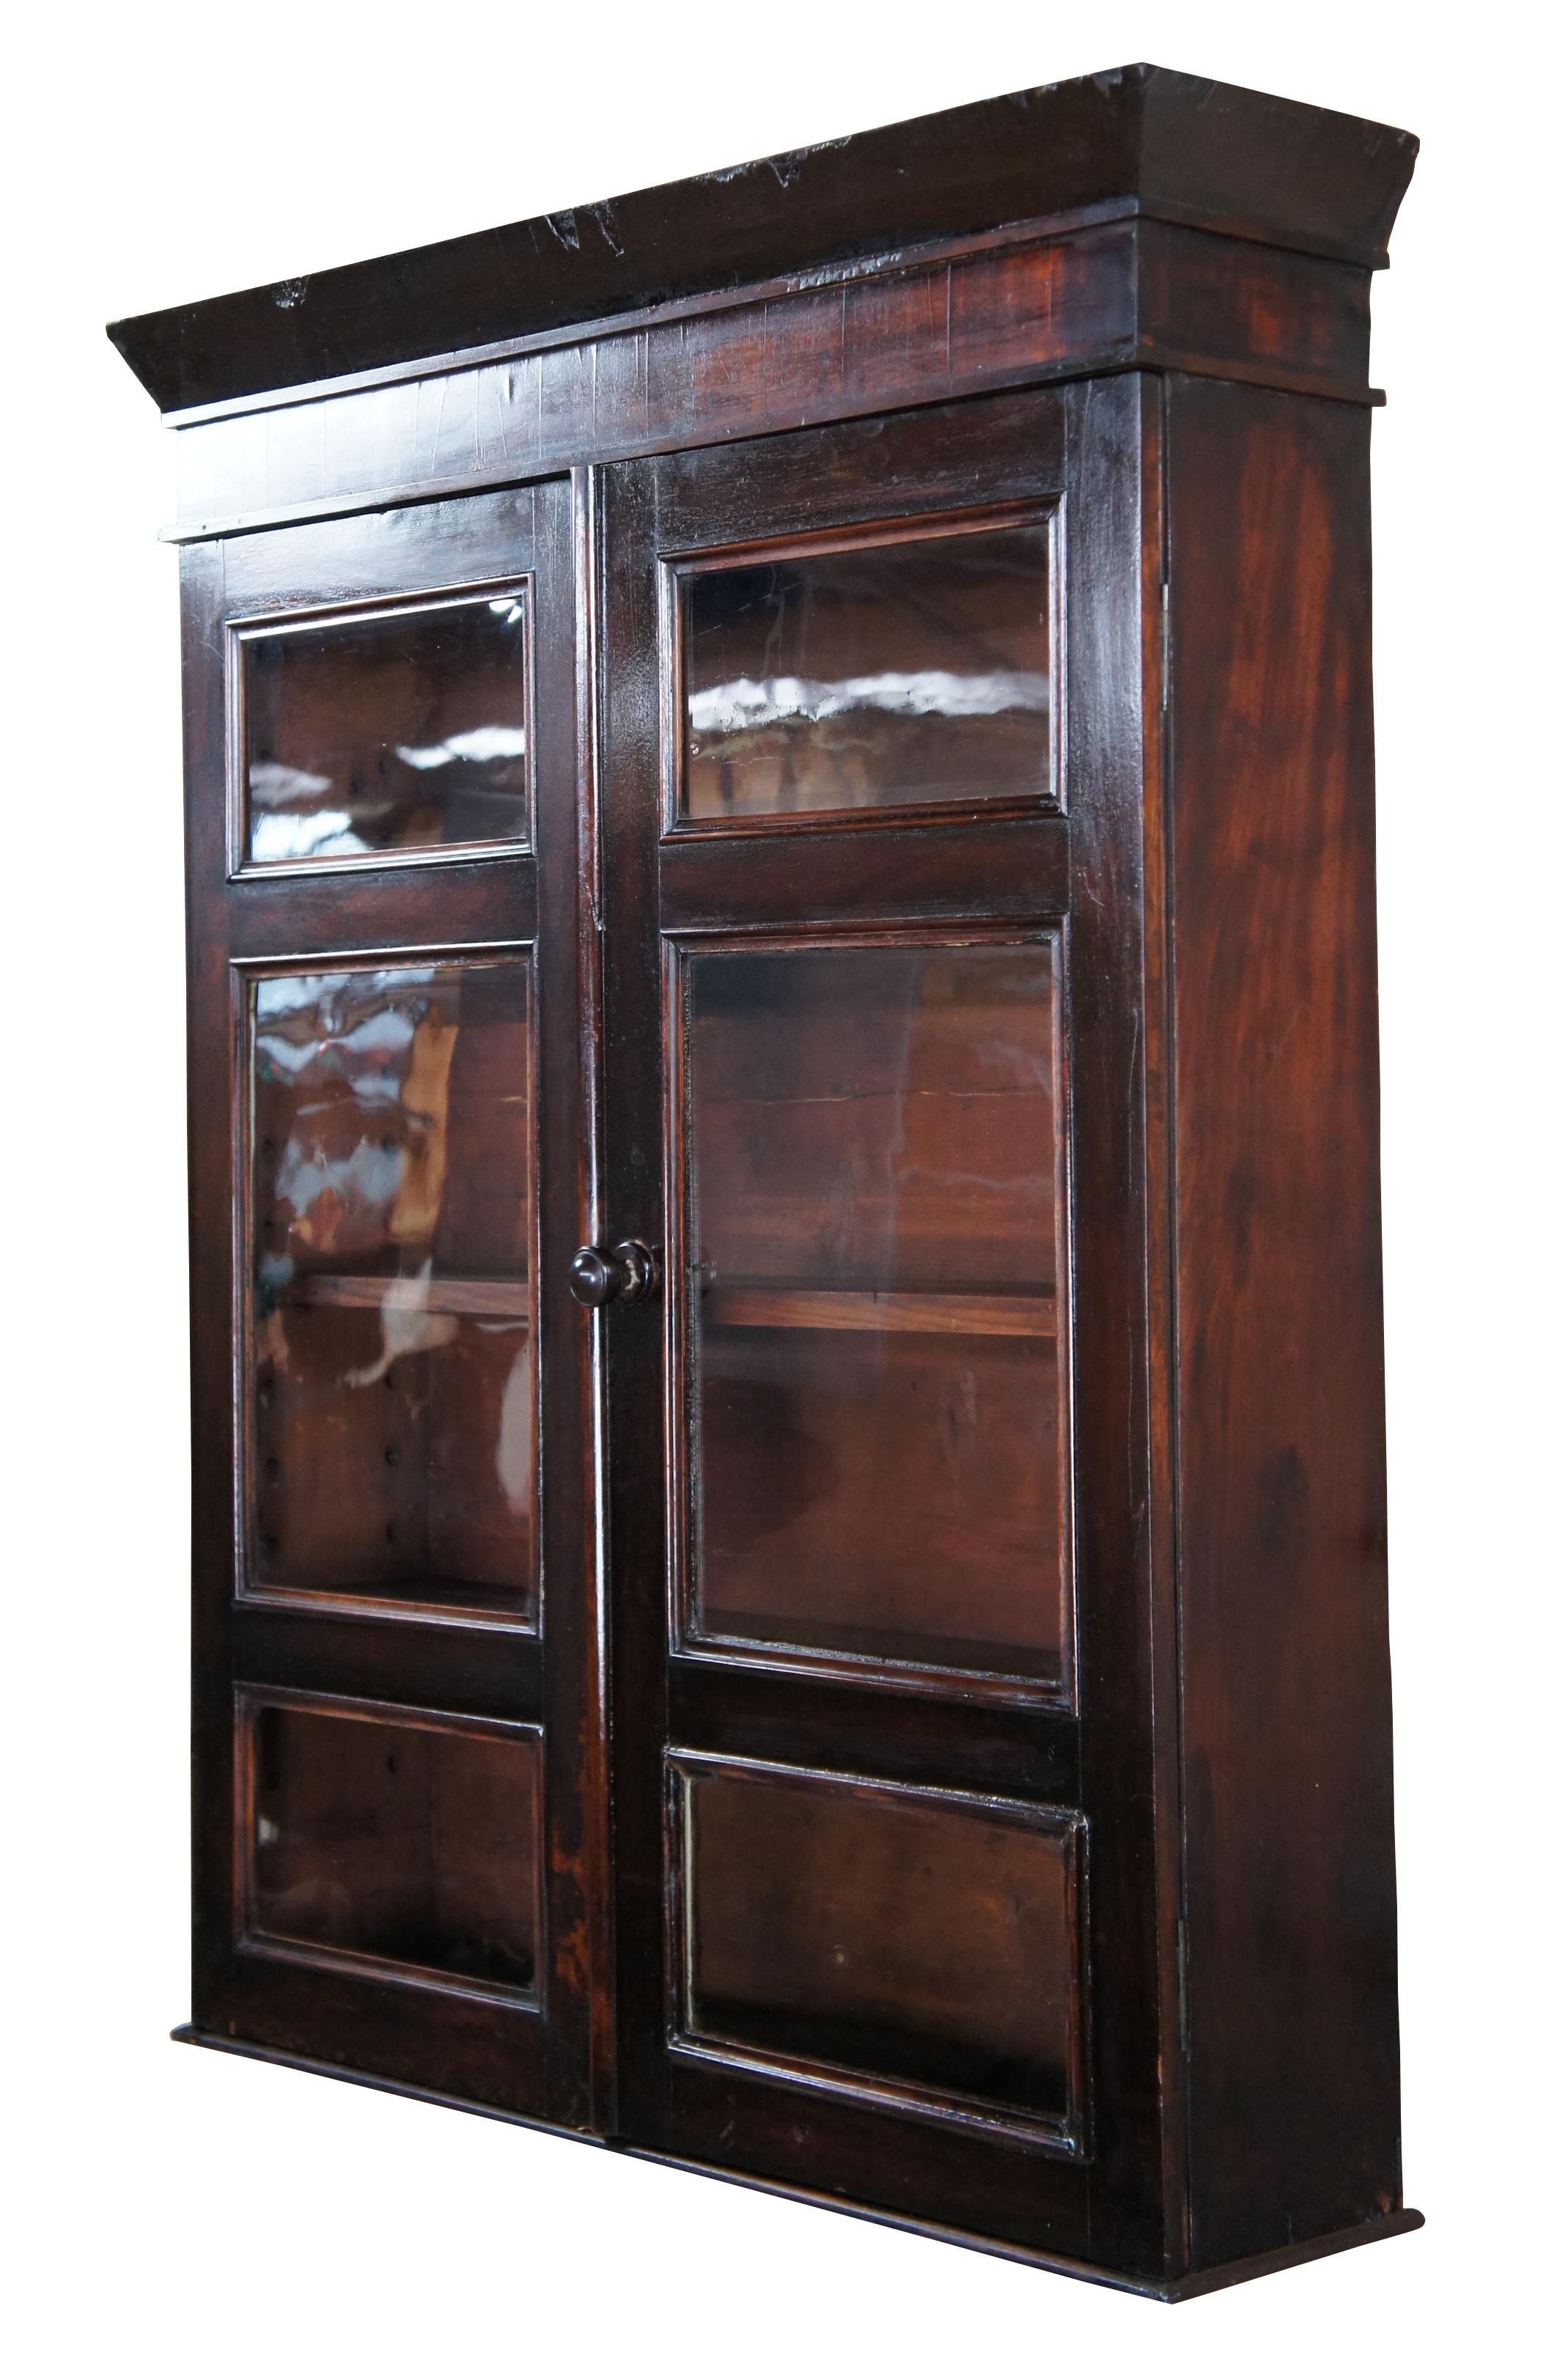 A stunning Victorian era American Country wall hanging curio cabinet Made from mahogany with three adjustable shelves behind original glass paned doors. It's large stature allows for versatile use. A great spice cabinet, hanging cupboard, display